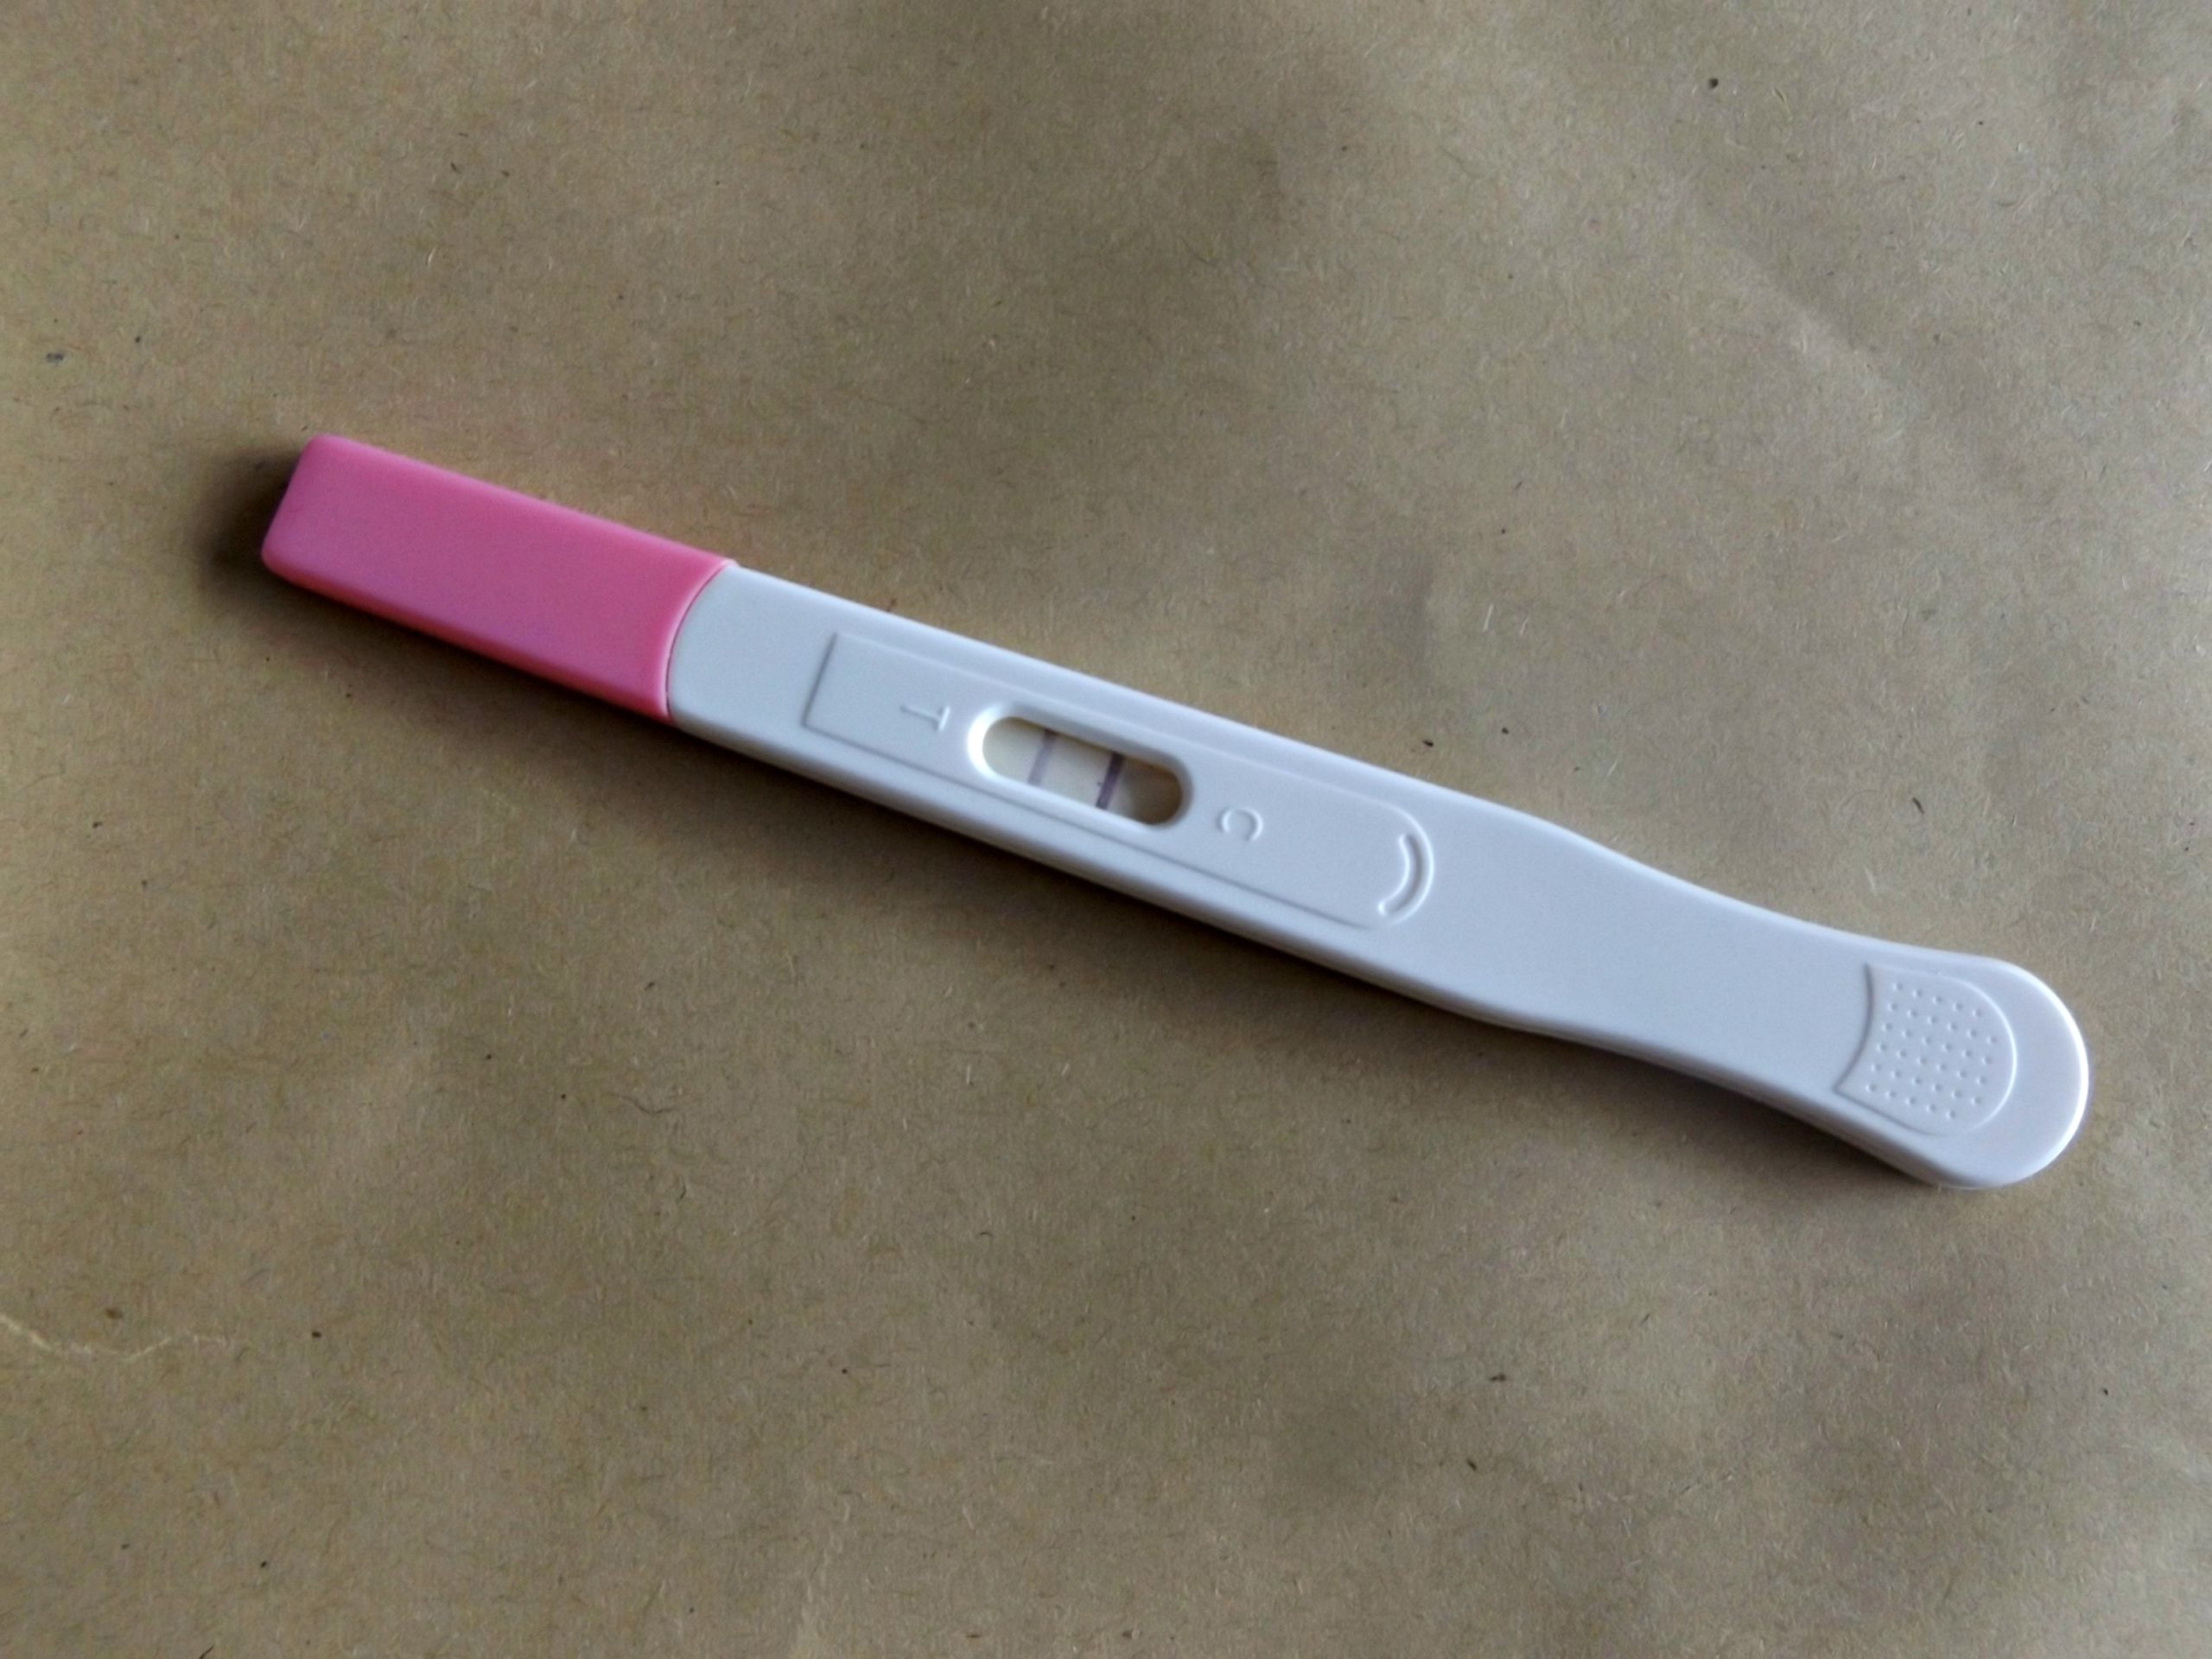 A Husband Found Positive Pregnancy Test In Bathroom Bin, His Wife Swears Its Not her’s!